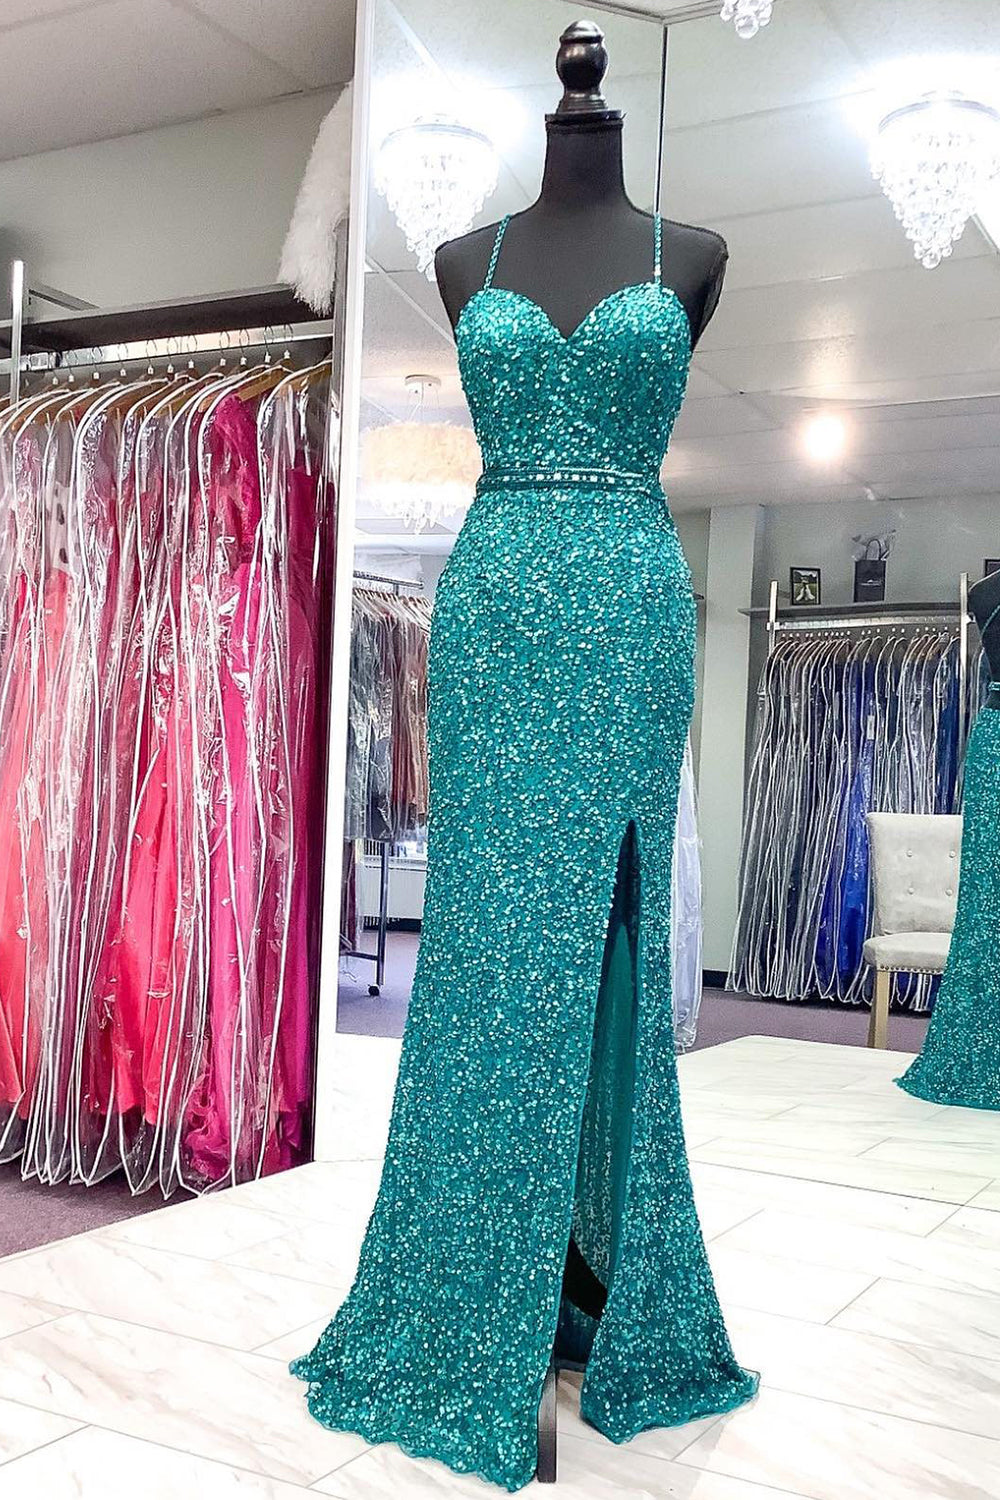 Spaghetti Straps Green Backless Sequins Corset Prom Dress with Slit Gowns, Bridesmaid Dress Tulle